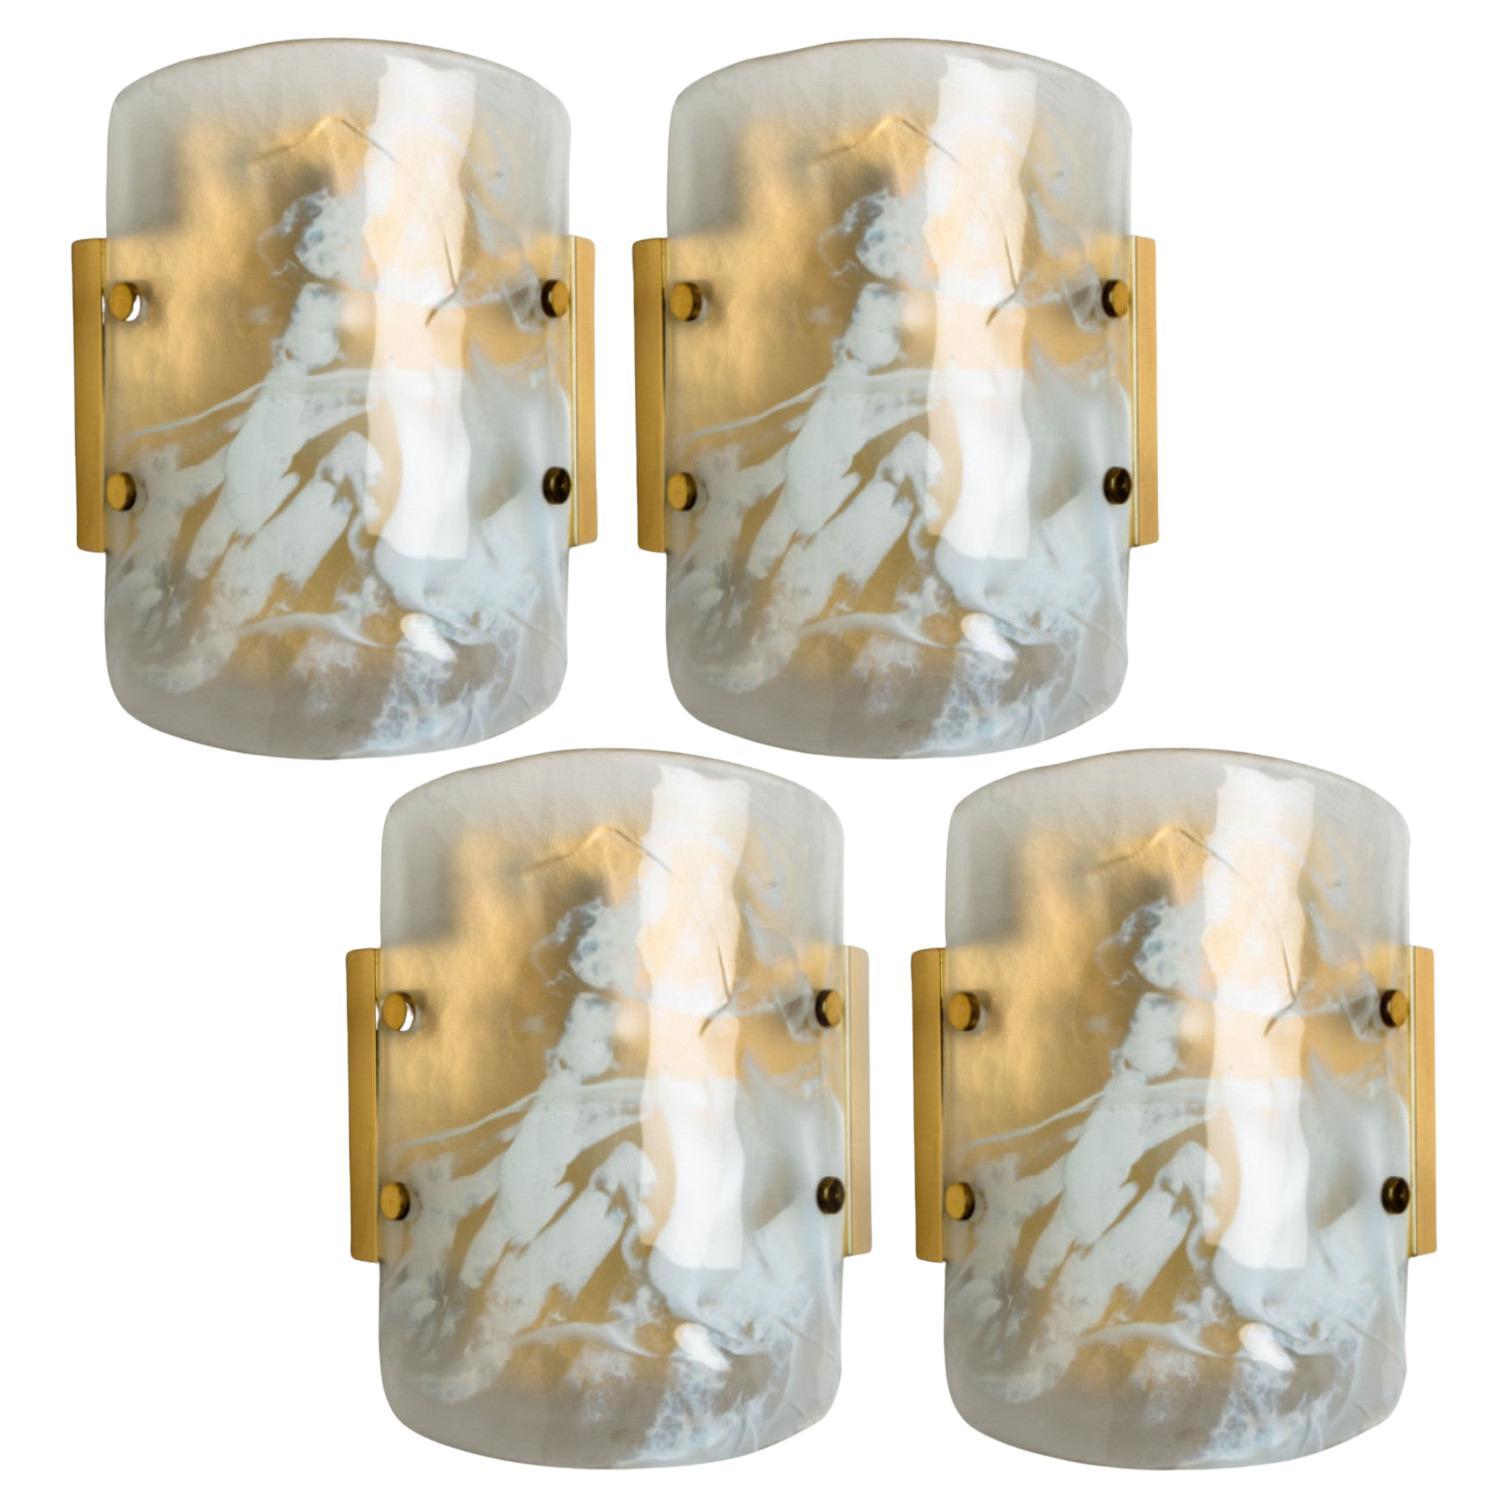 Hillebrand Marble Murano Glass Wall Light Fixtures, 1960s For Sale